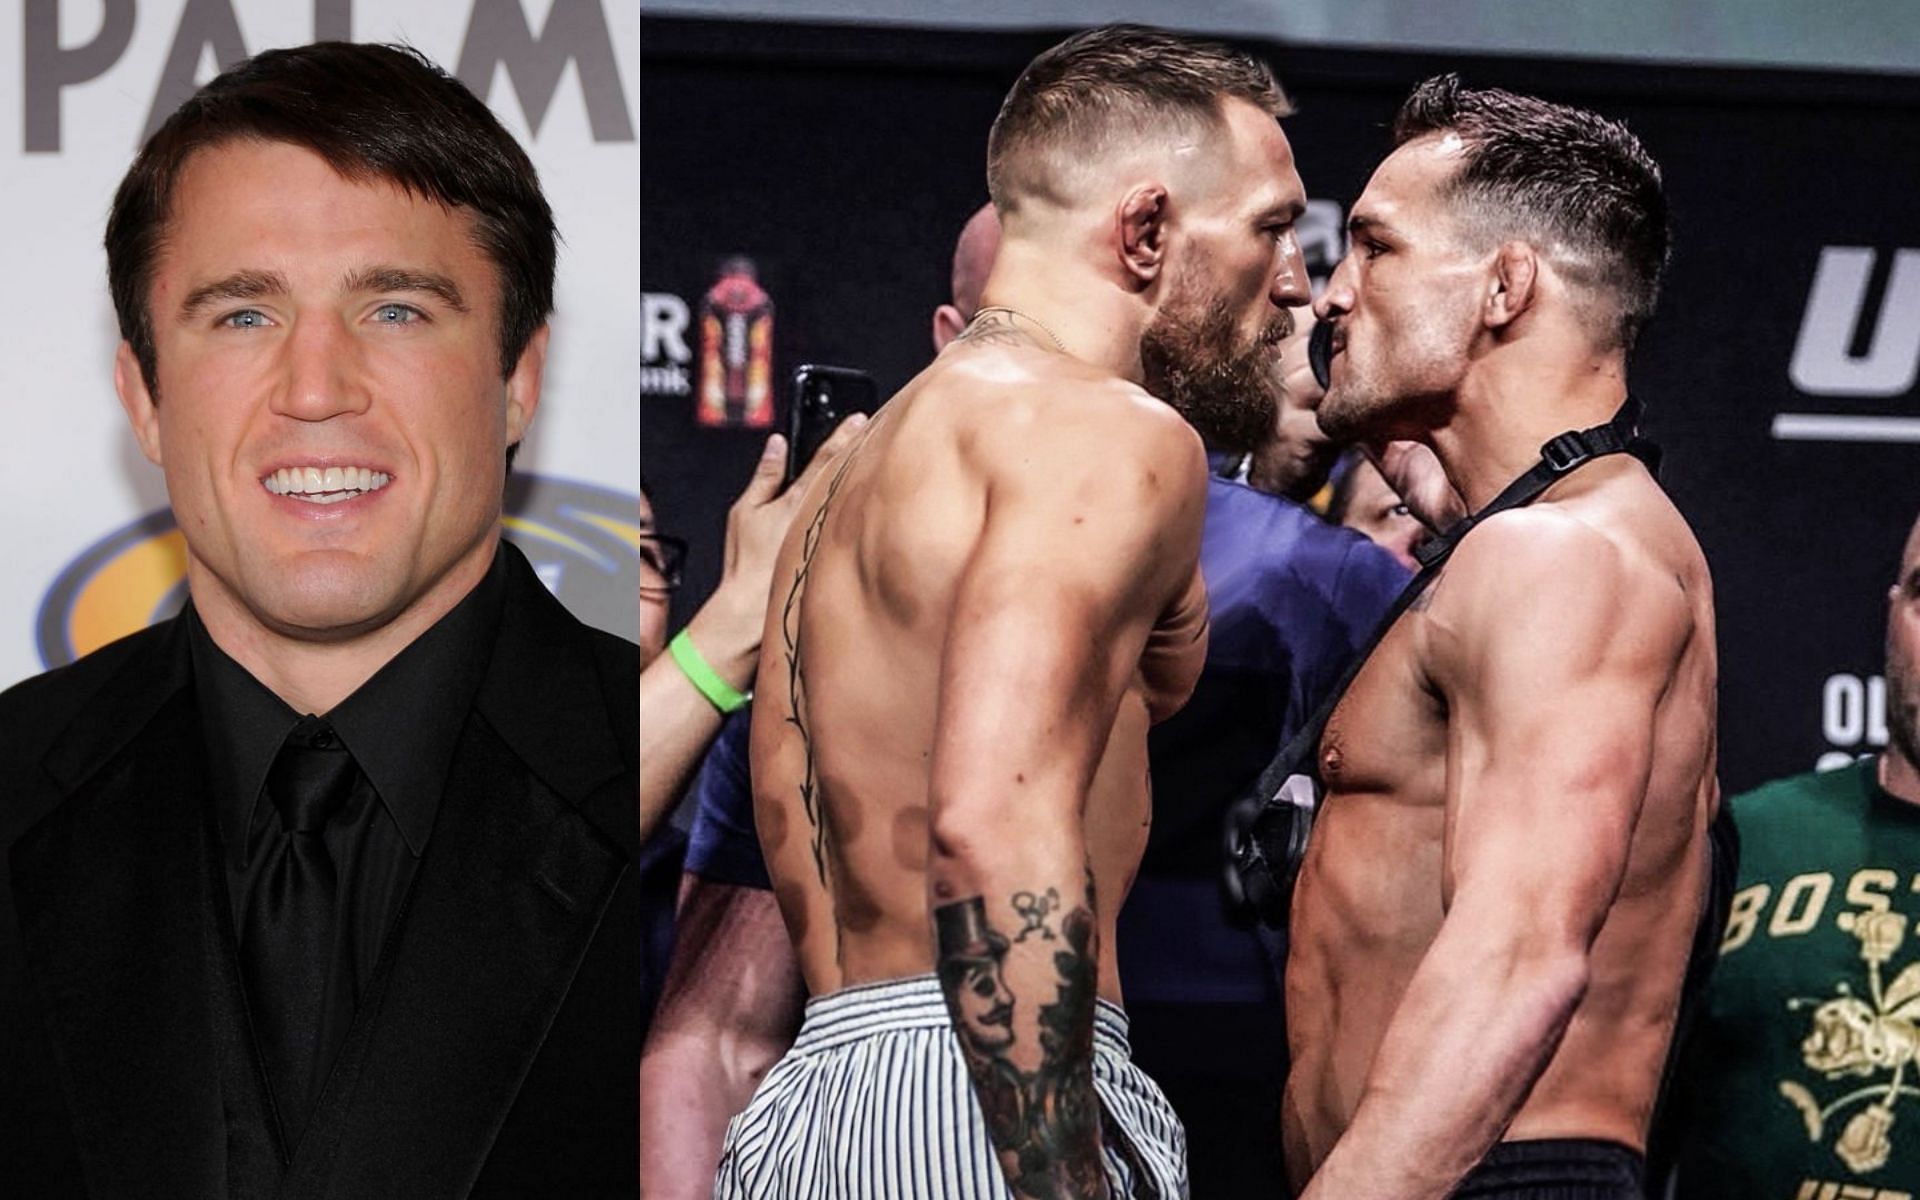 Chael Sonnen (left) explains why Michael Chandler calling out Conor McGregor made sense [Right photo via @MikeChandlerMMA on Twiter]